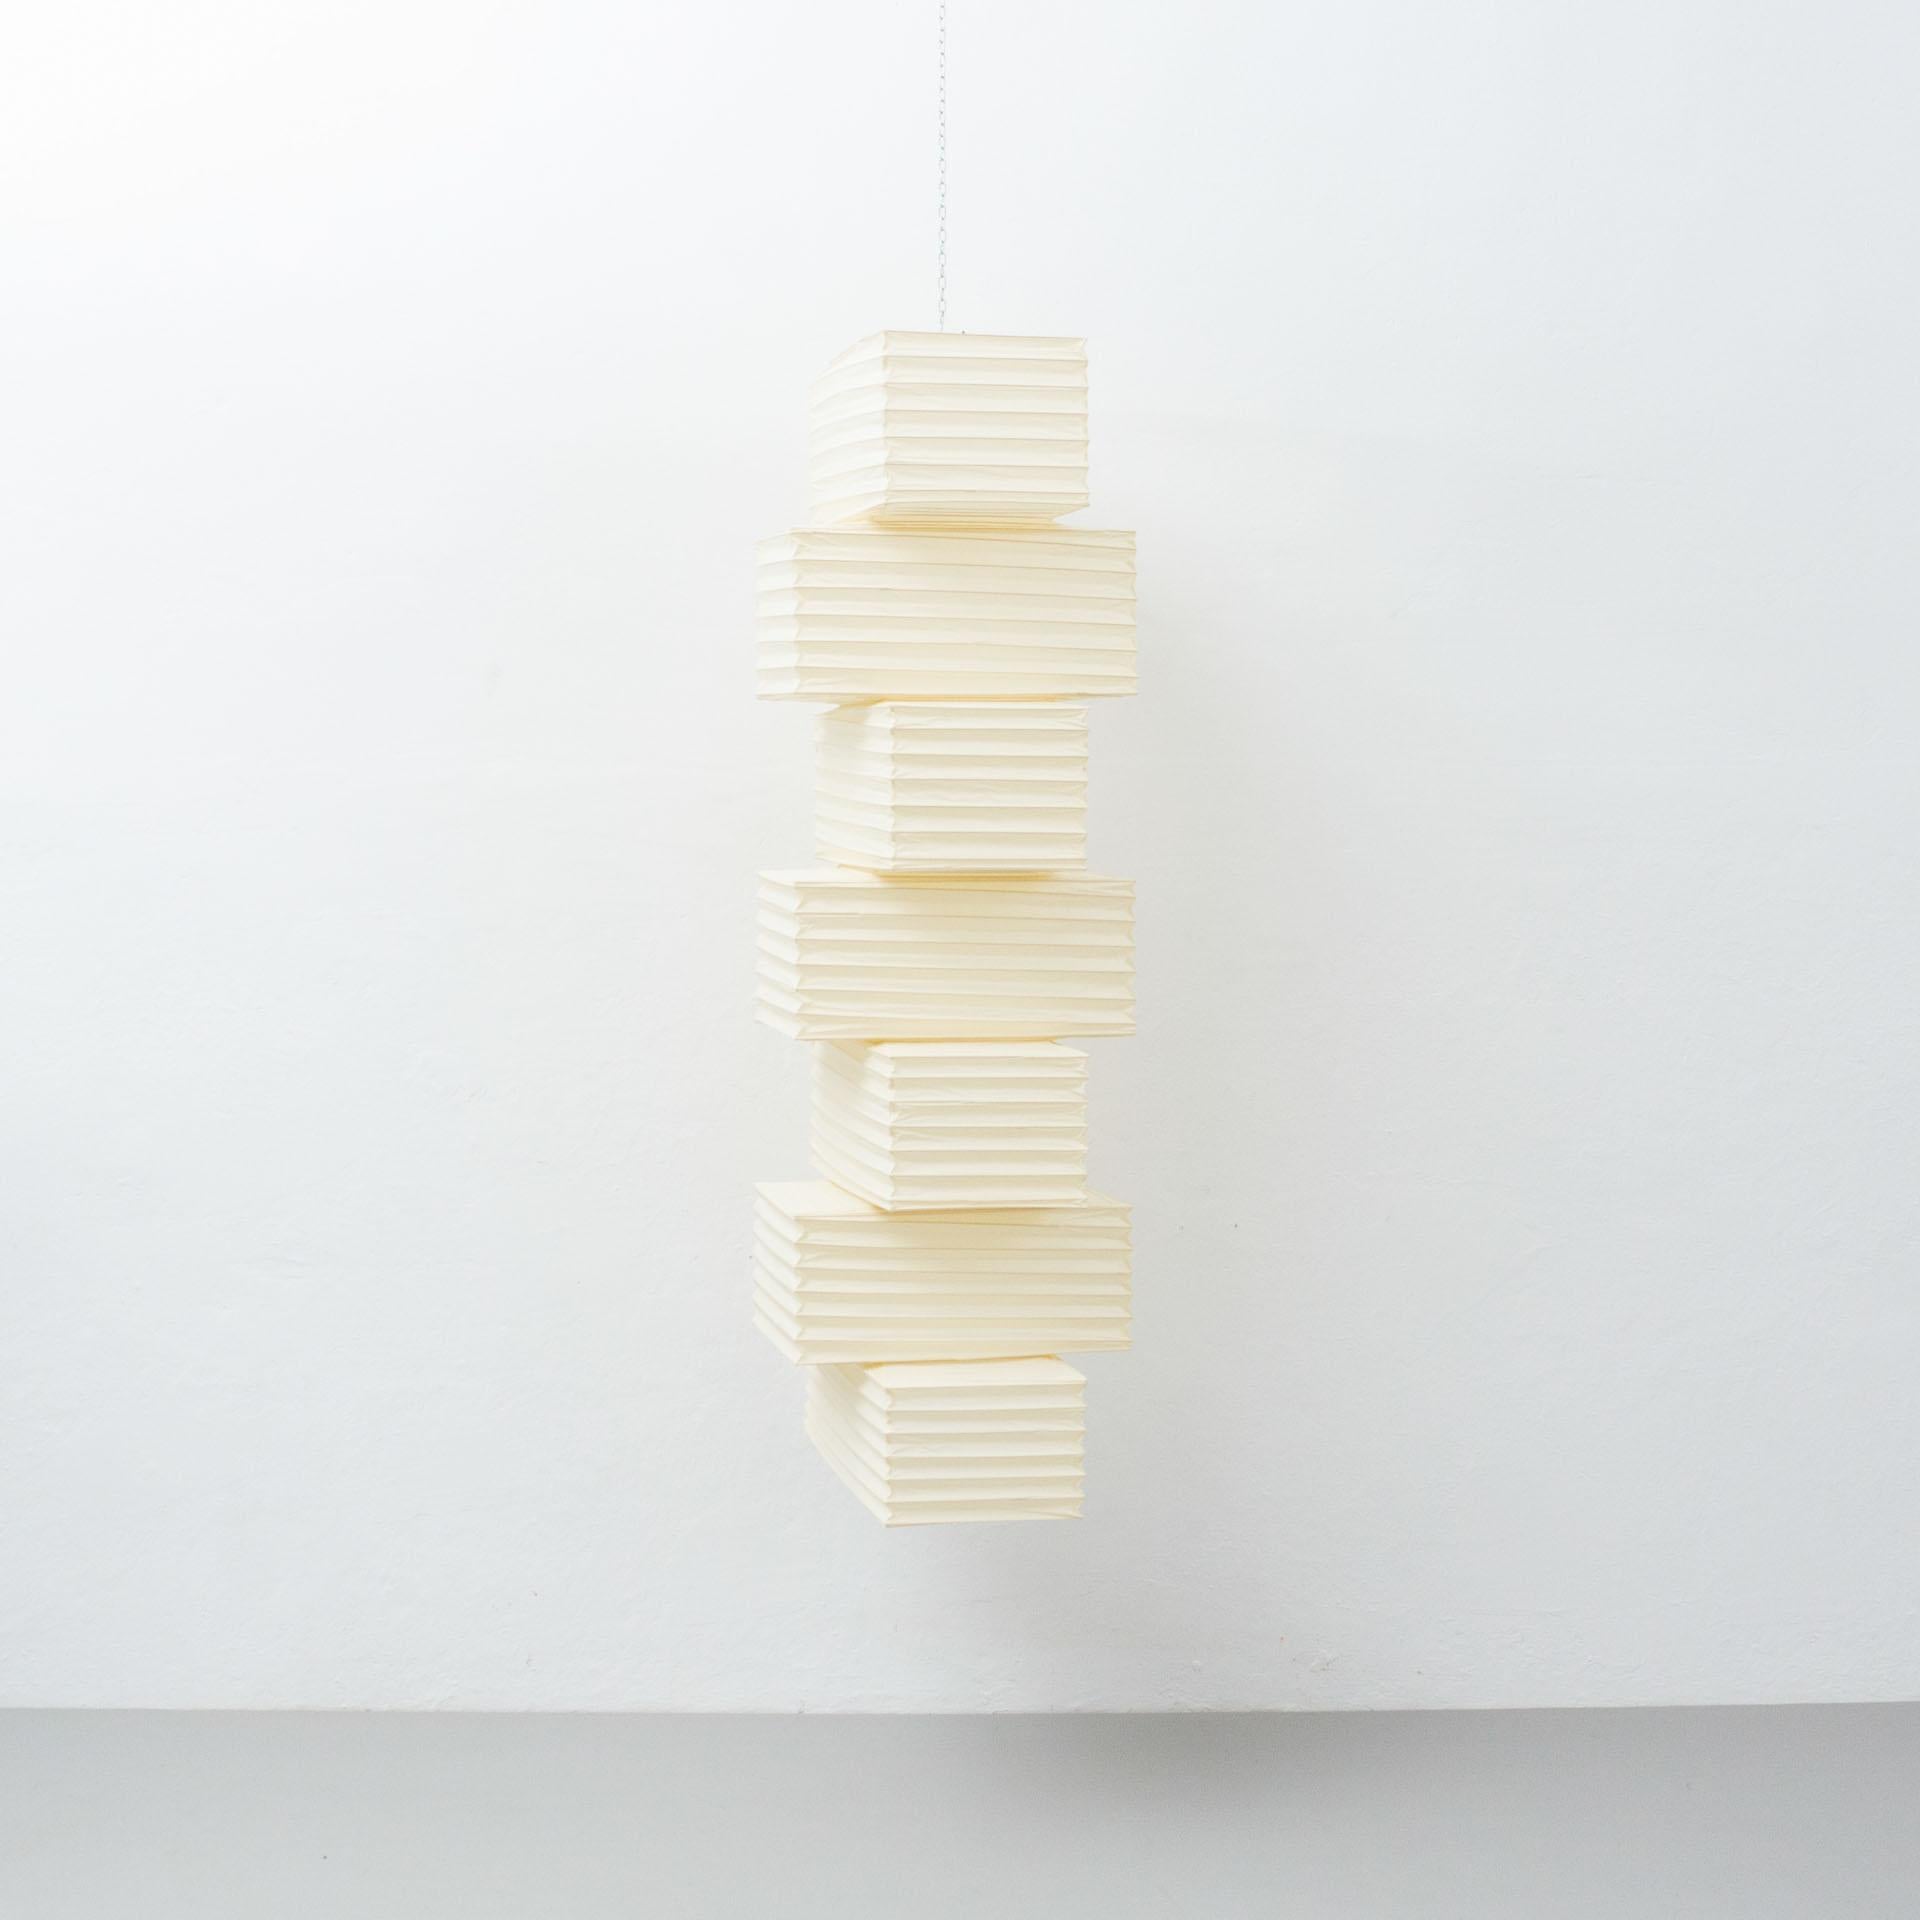 Pendant lamp model 36N designed by Isamu Noguchi.
Manufactured by Ozeki & Company Ltd. (Japan.) 
Bamboo ribbing structure covered by washi paper manufactured according to the traditional procedures.

In original condition, with minor wear